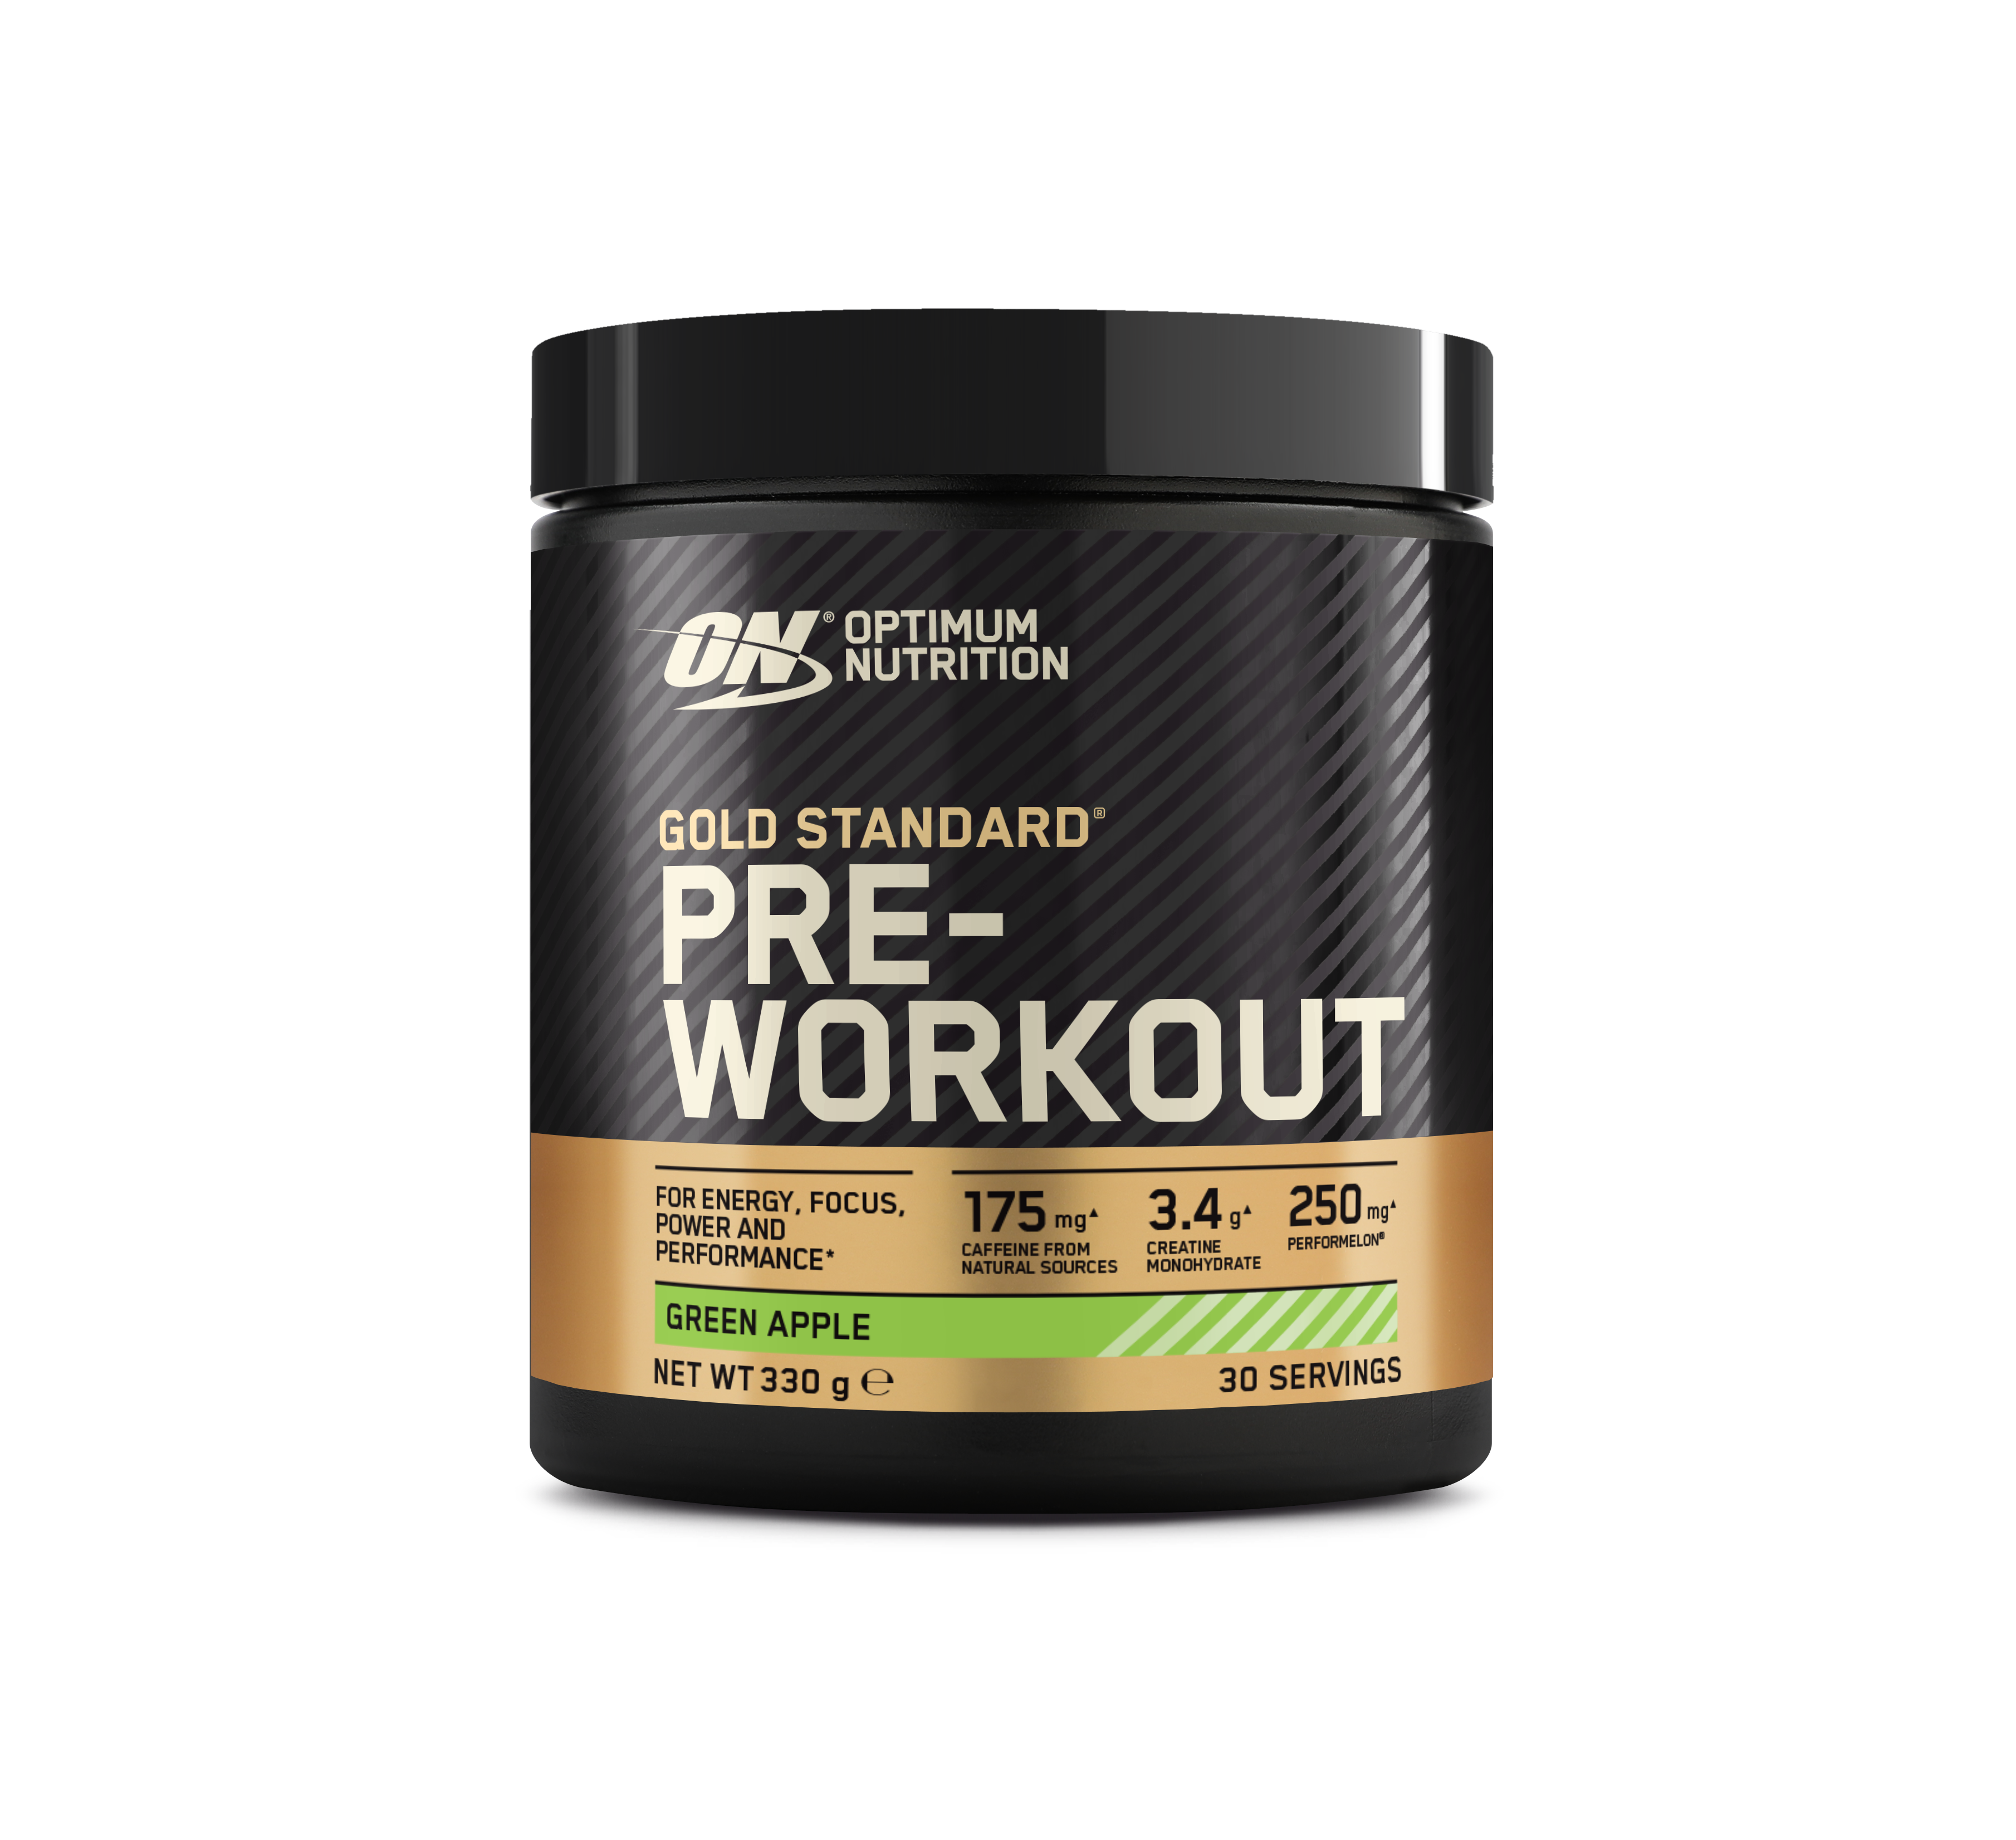 Gold Standard Pre Workout Body Fit